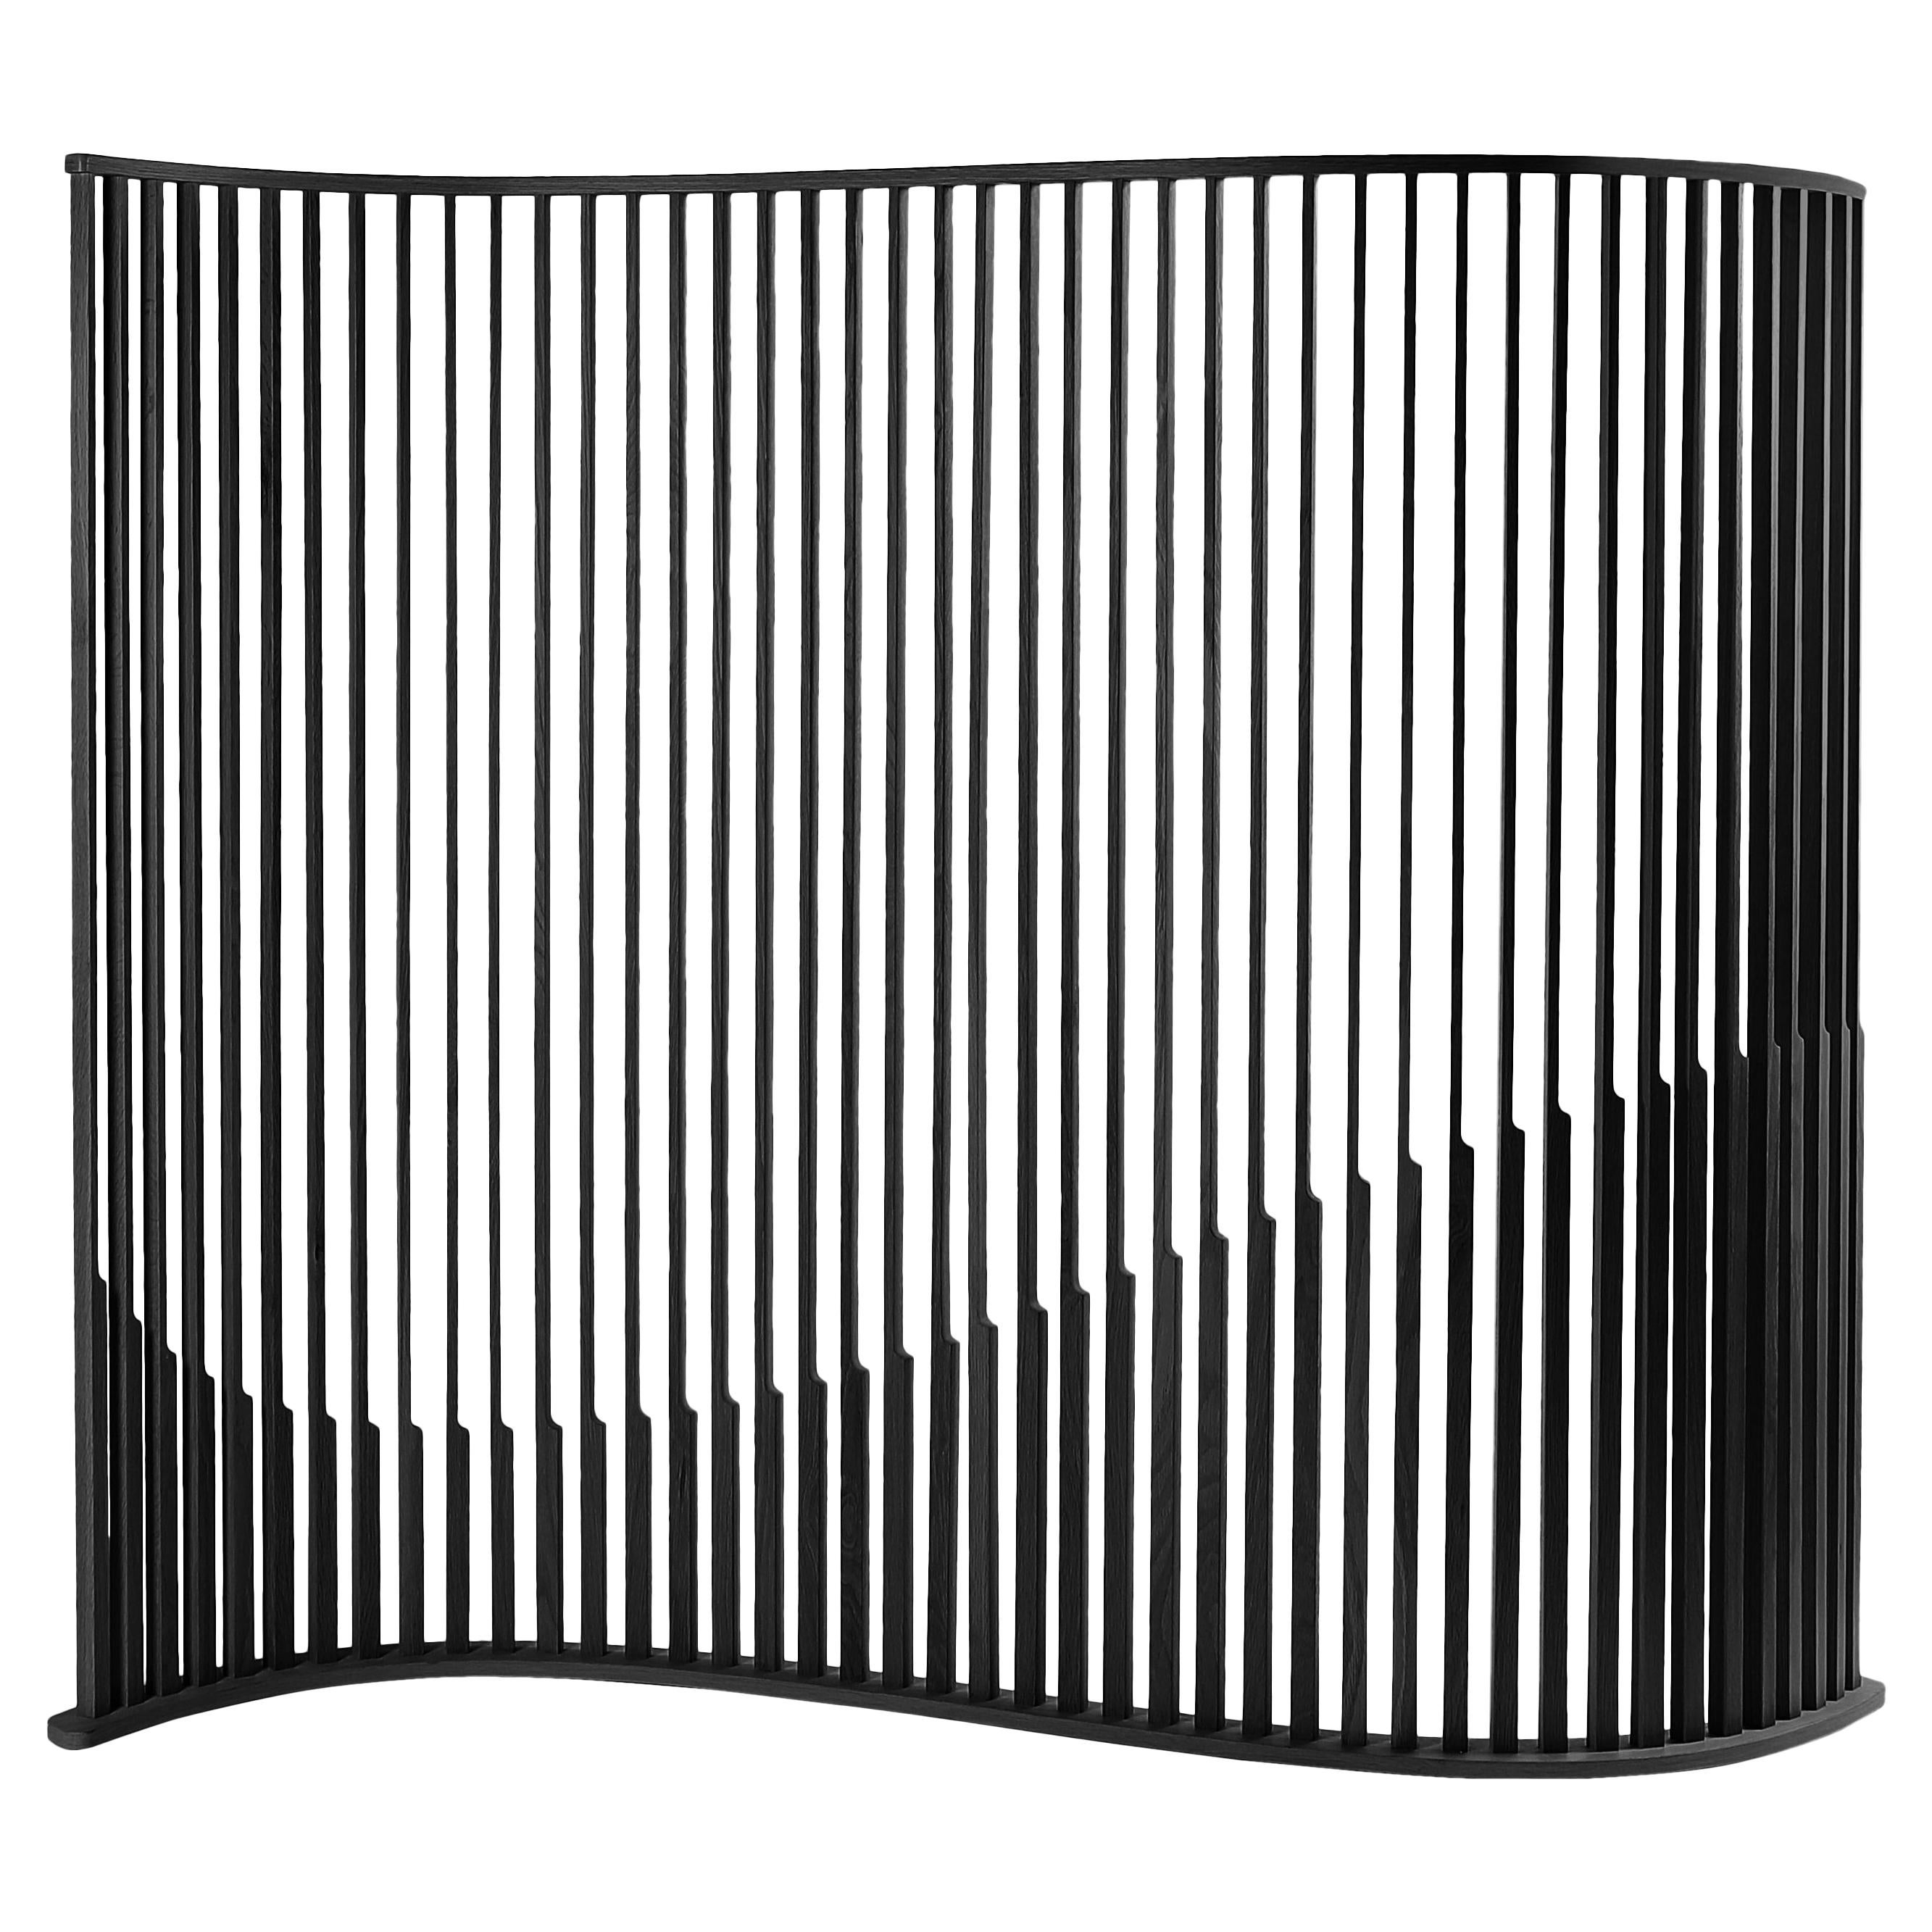 Laws of Motion Room Divider in Burn Wood, Space Divider Screen by Joel Escalona For Sale